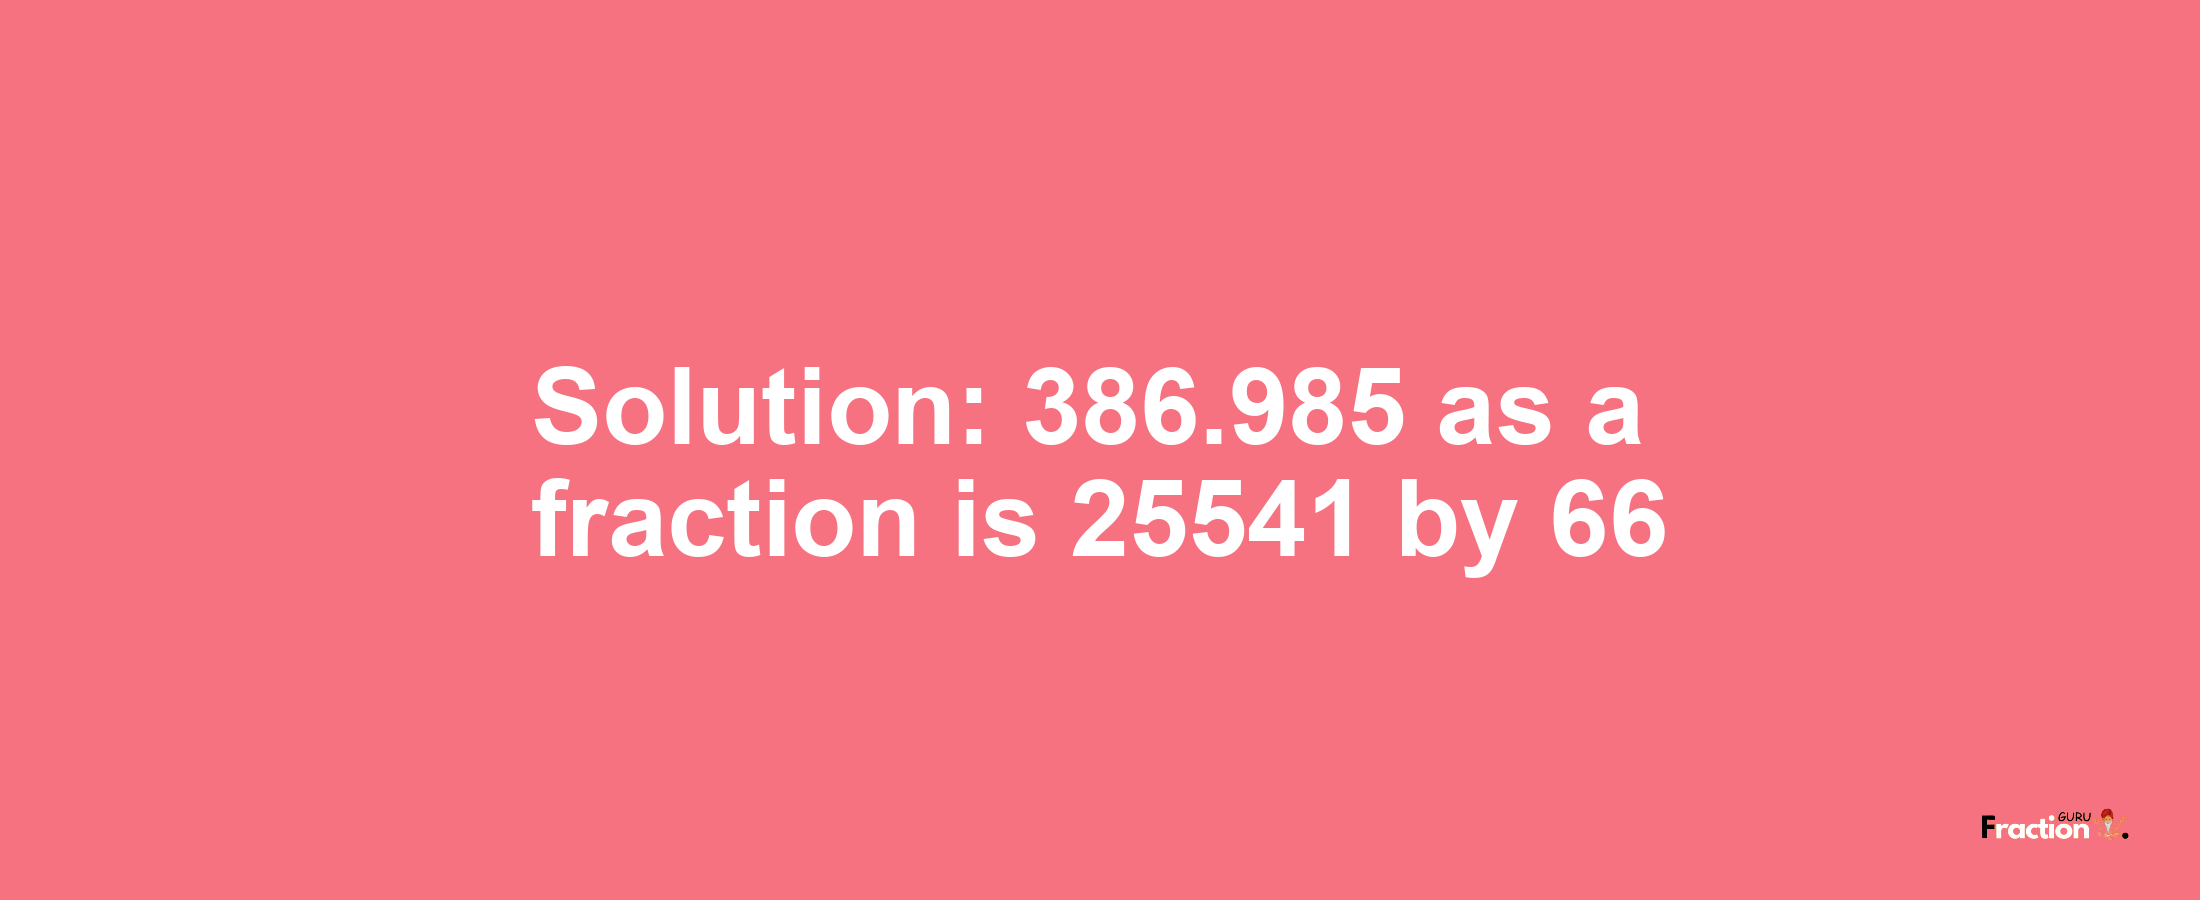 Solution:386.985 as a fraction is 25541/66